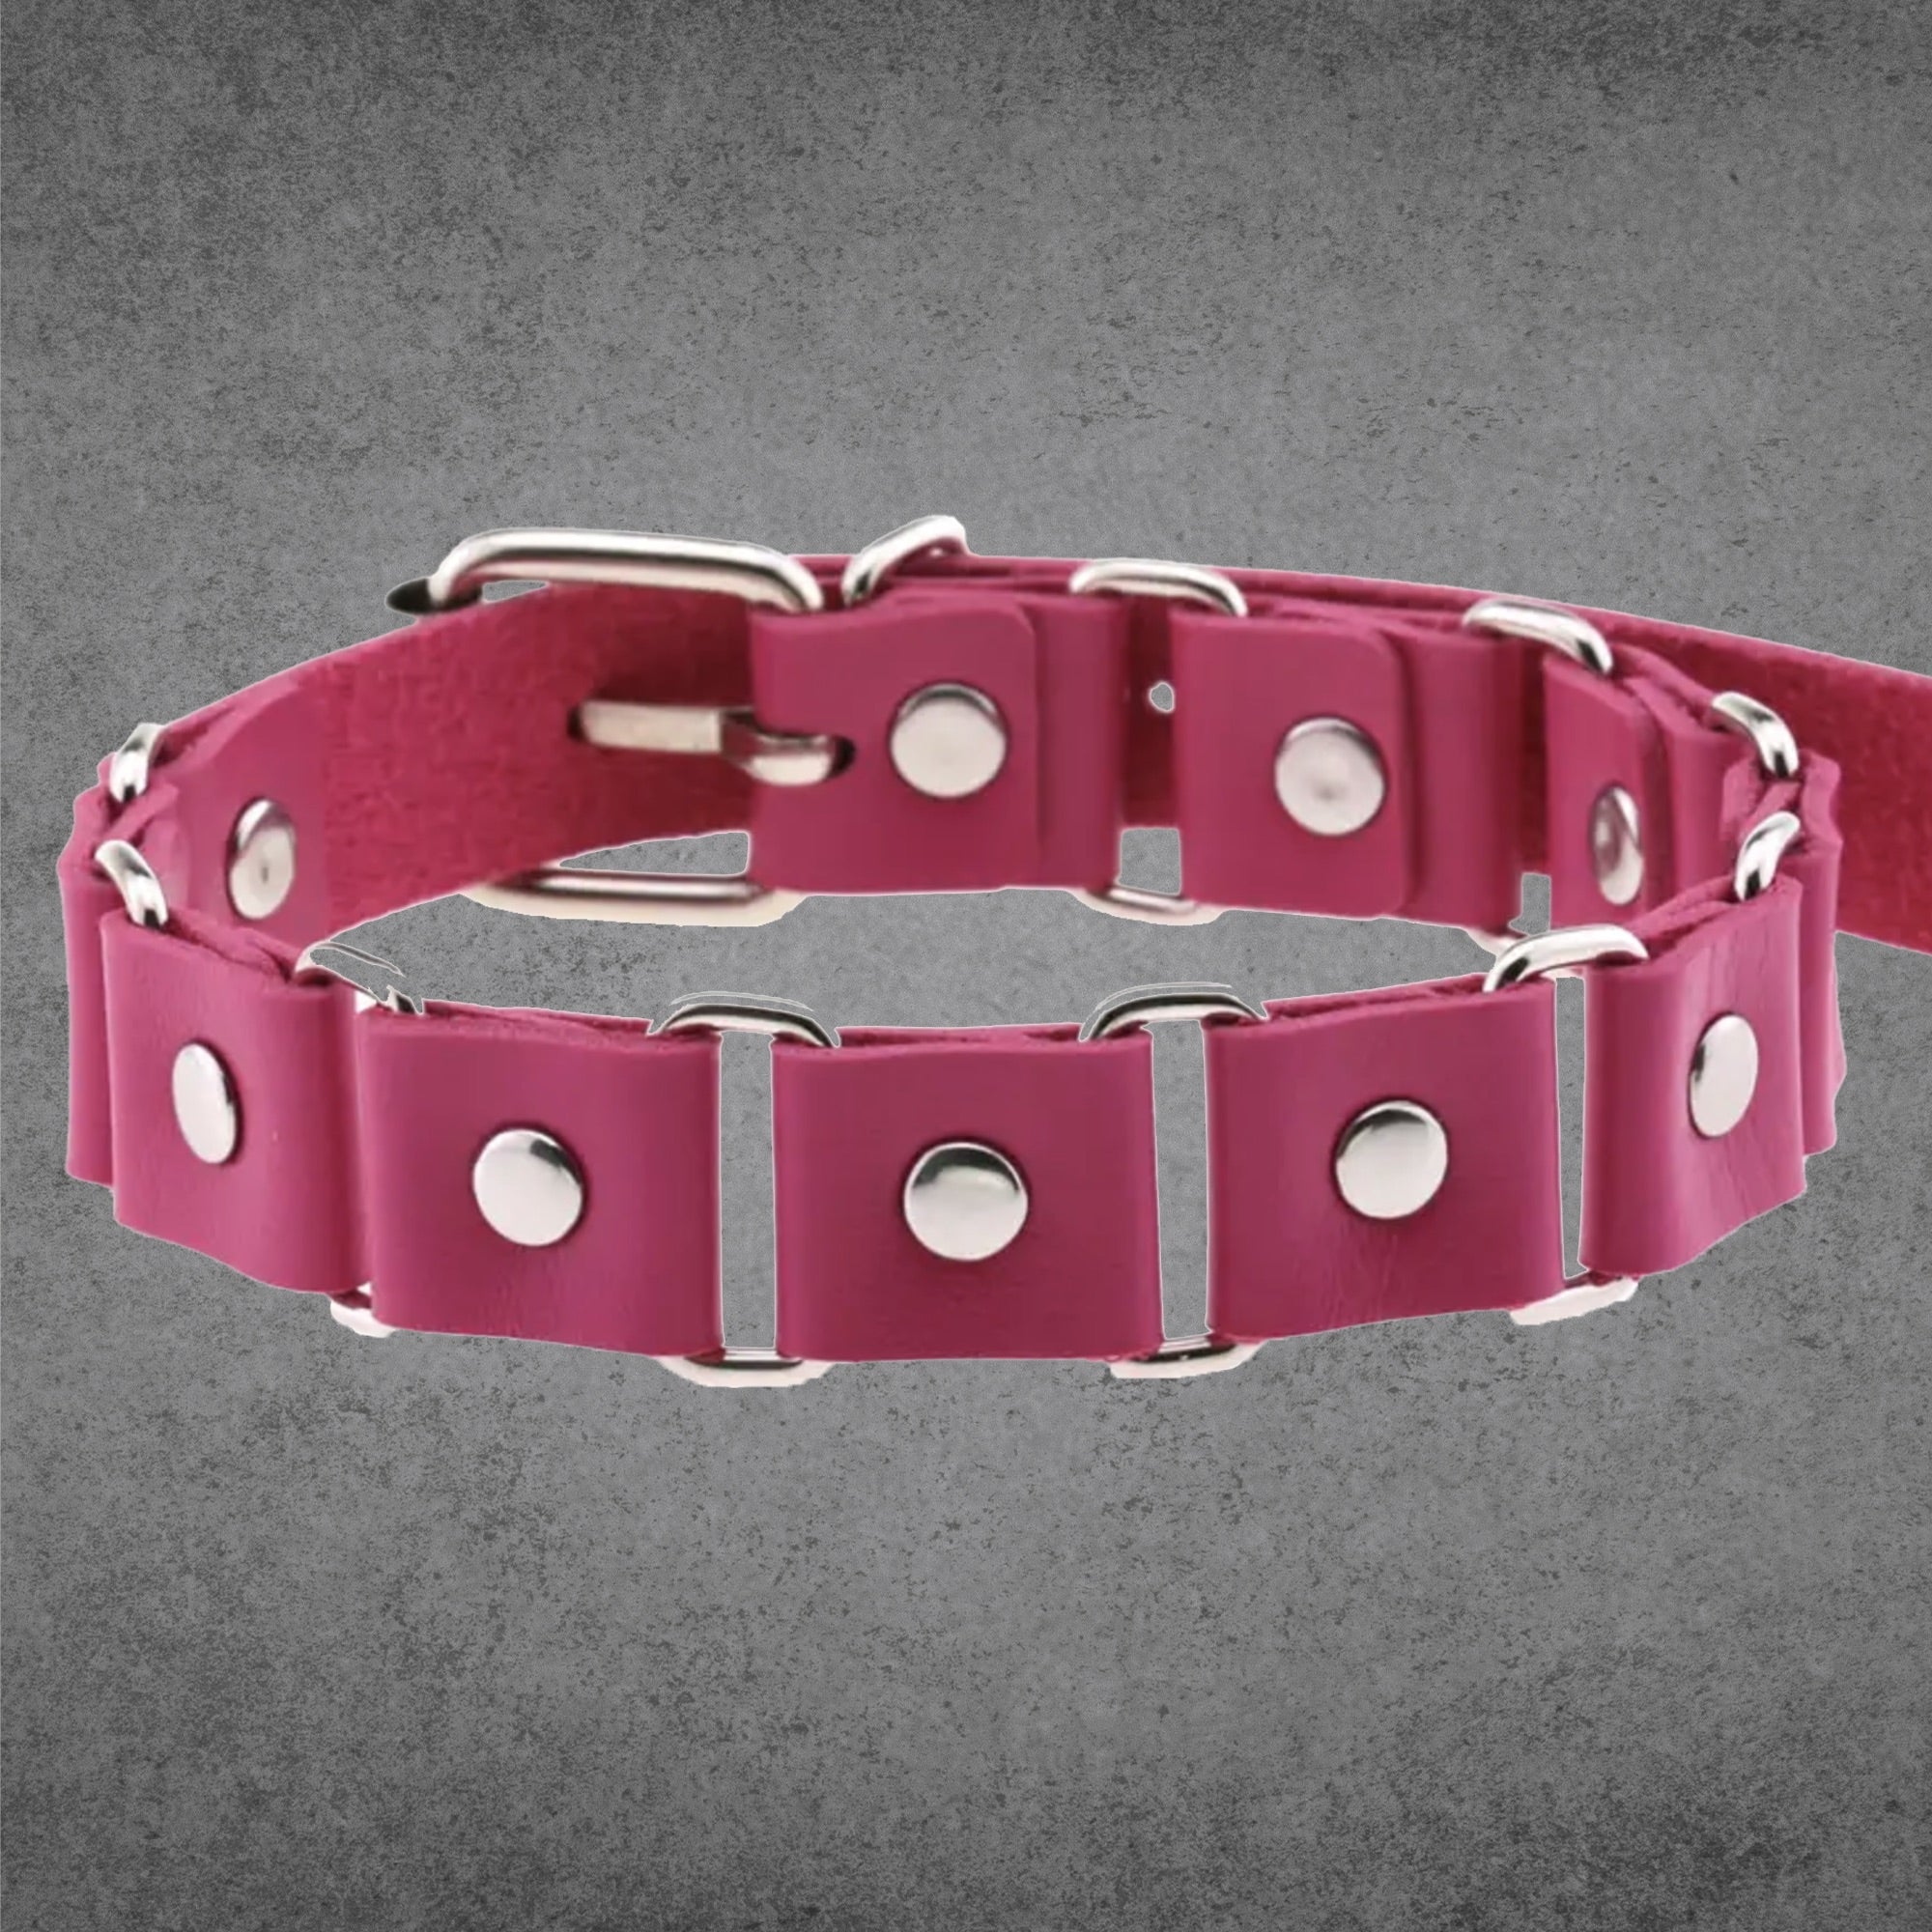 Linked Studded Collar - Hot Pink